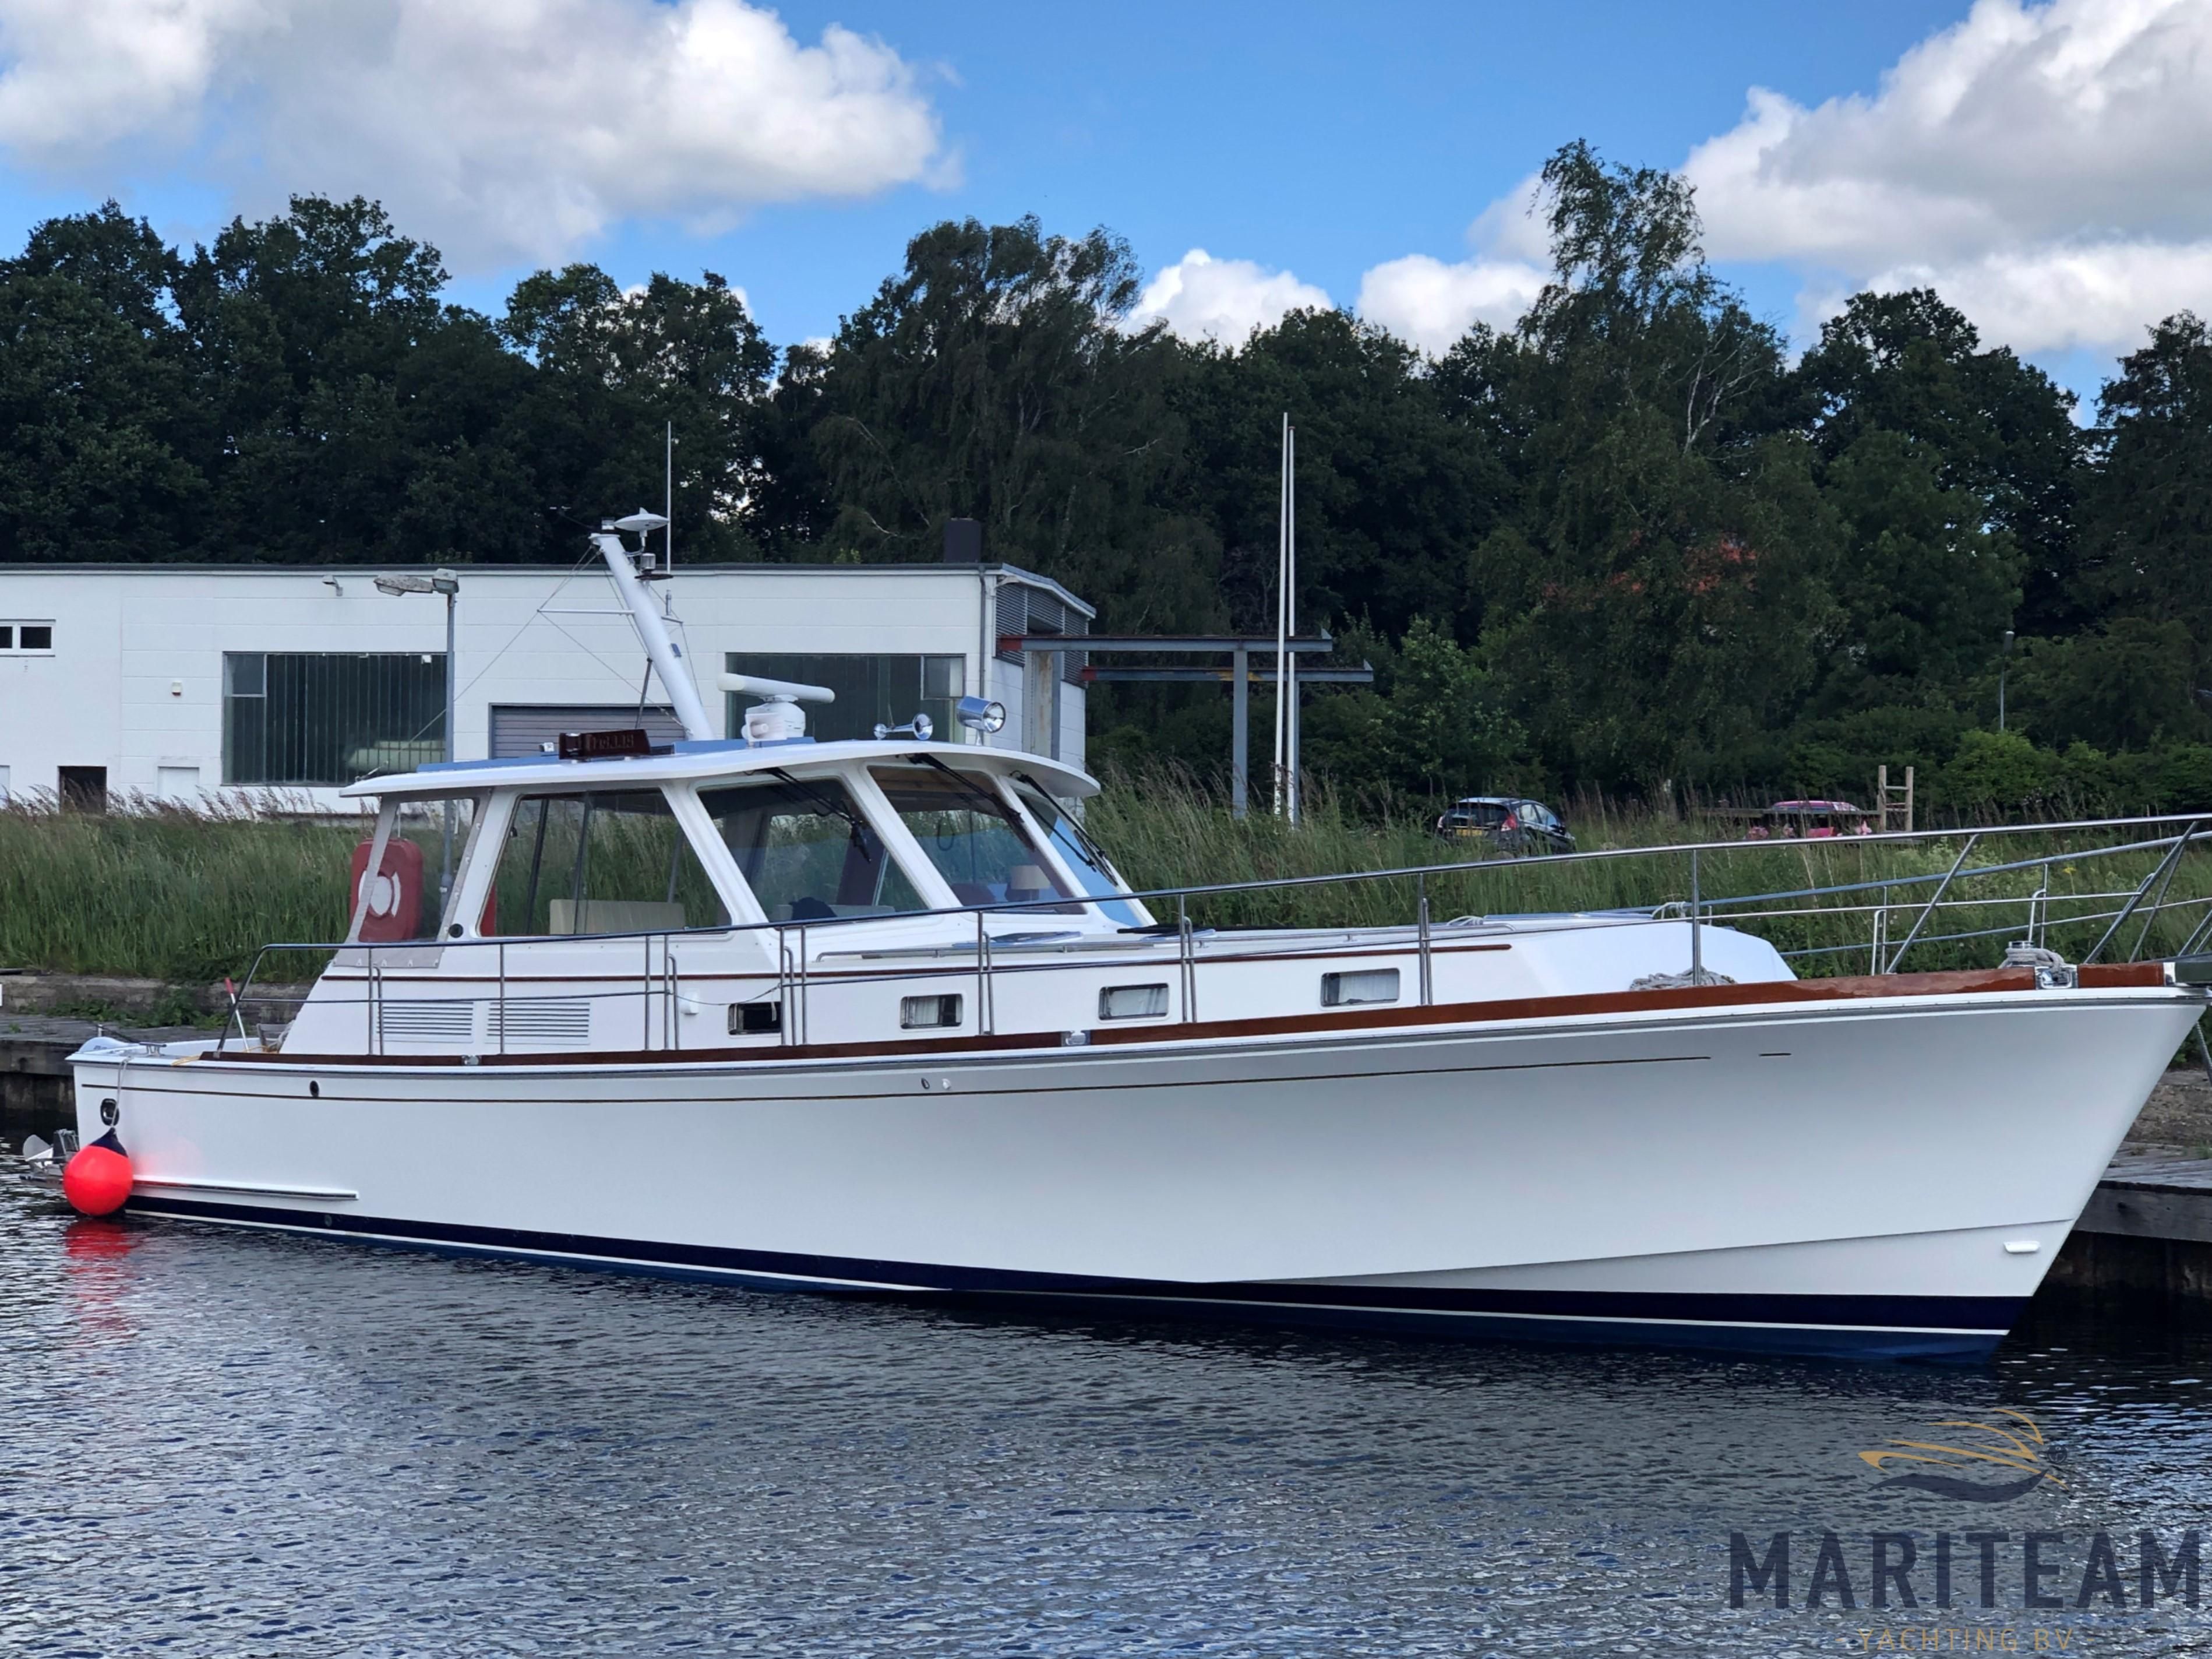 2002 Grand Banks Eastbay 49 HX Motor Yacht for sale